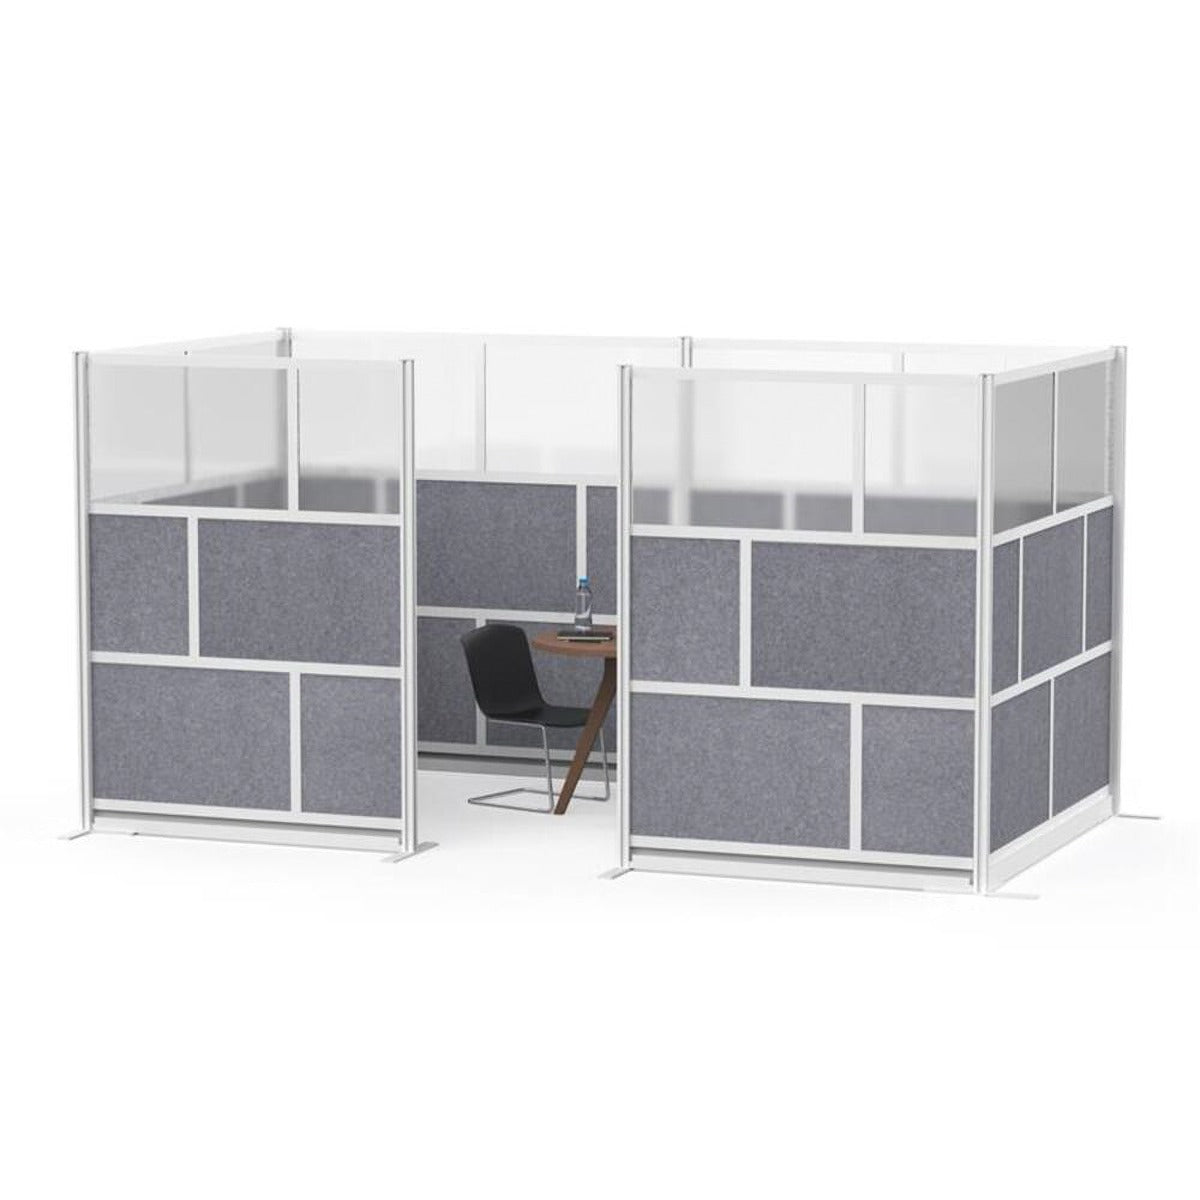 Luxor MW-7070-XFCG - Luxor Modular Room Divider Wall System - 70" x 70" Add-On Wall - SchoolOutlet